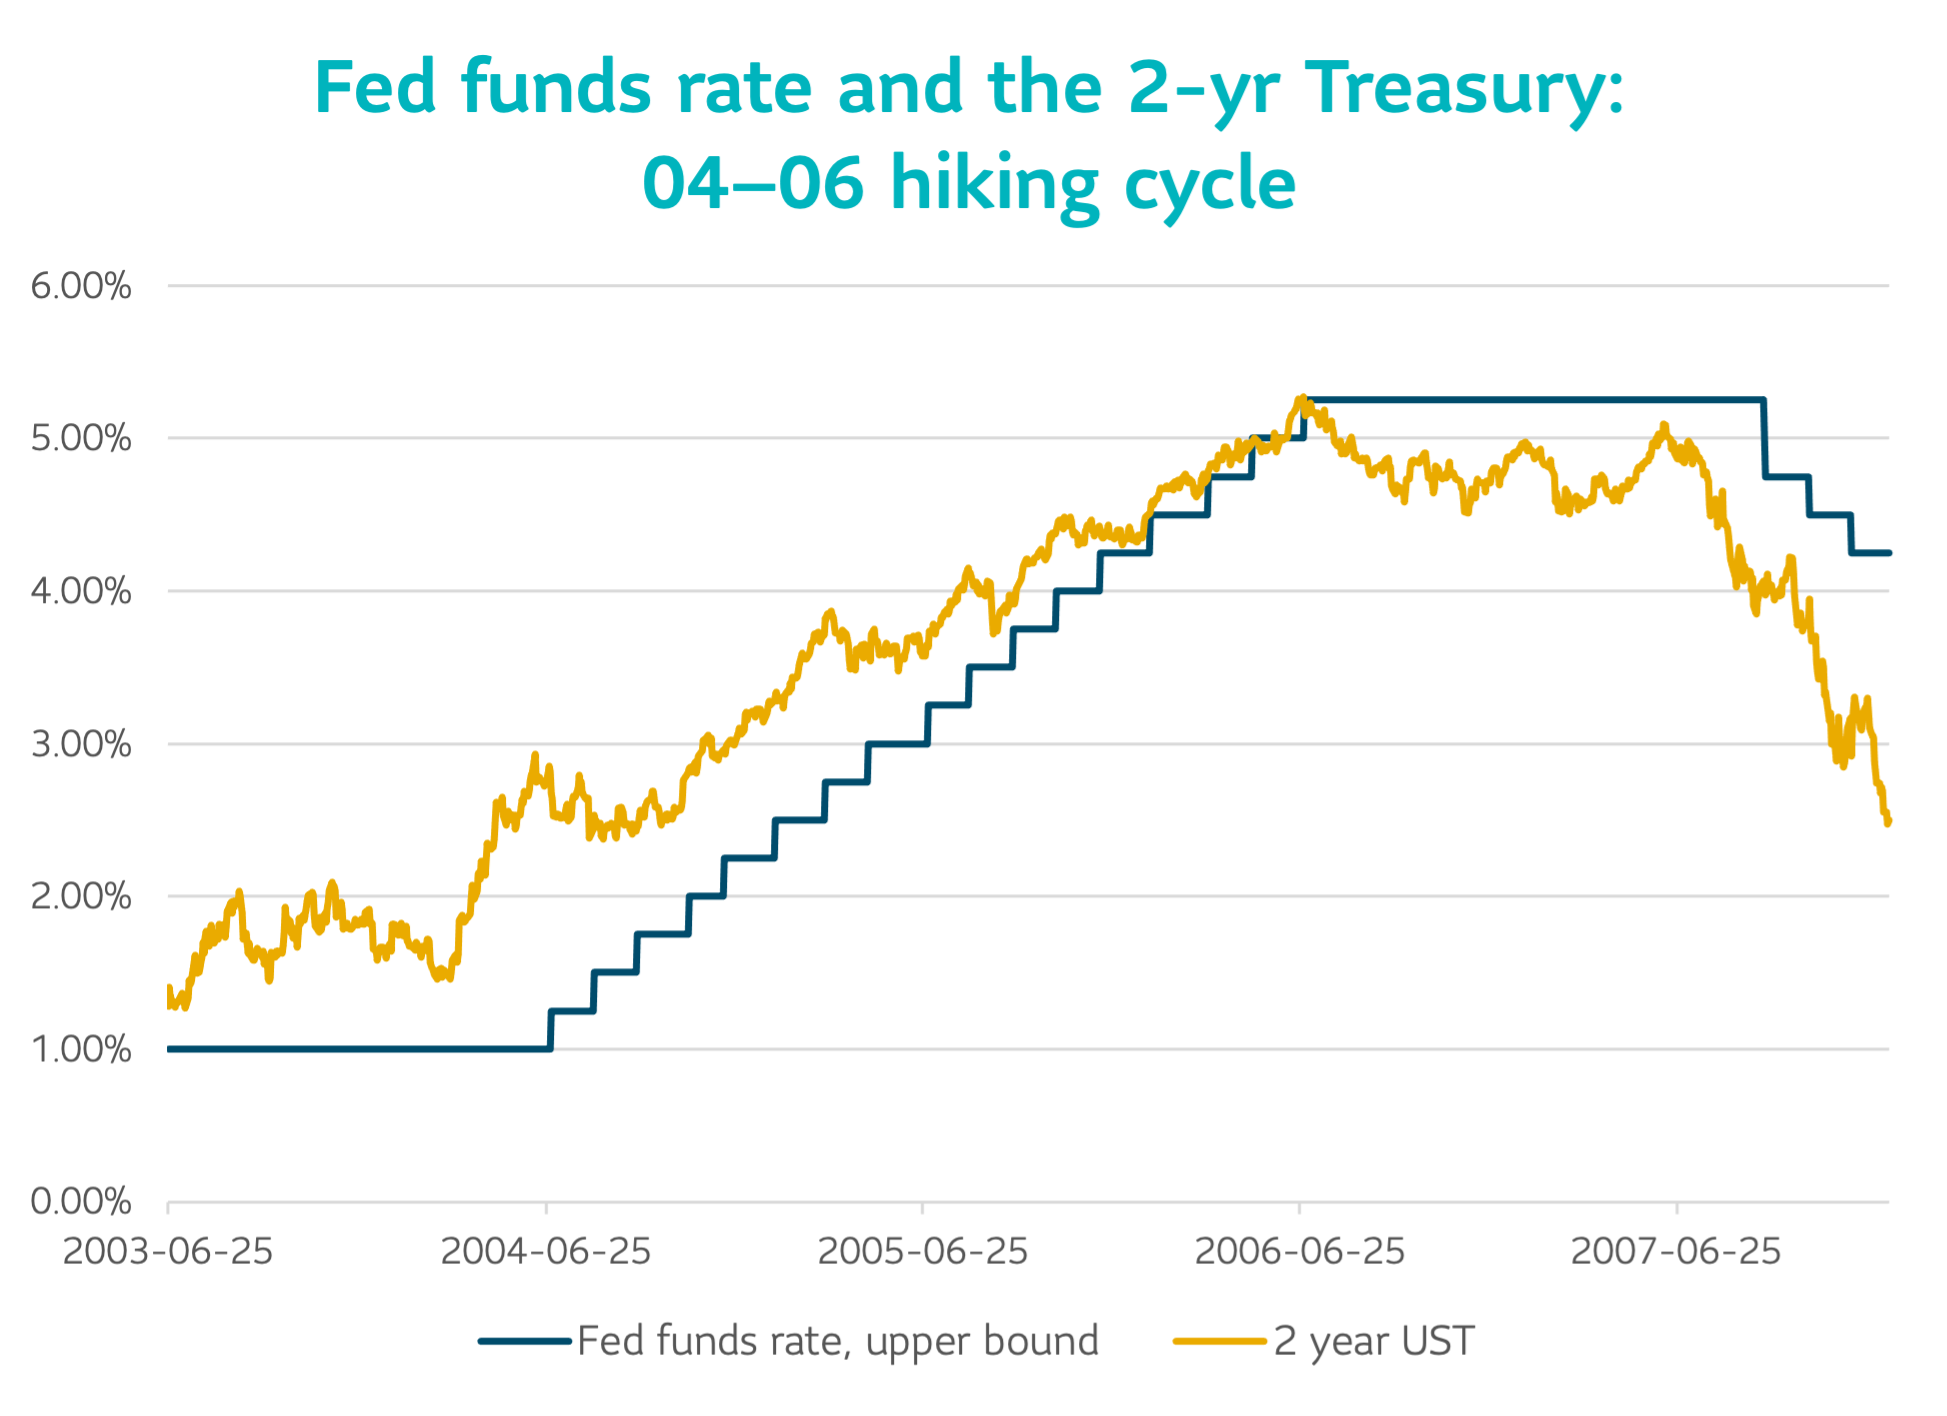 Fed funds rate and the 2-year Treasury: 04-06 hiking cycle